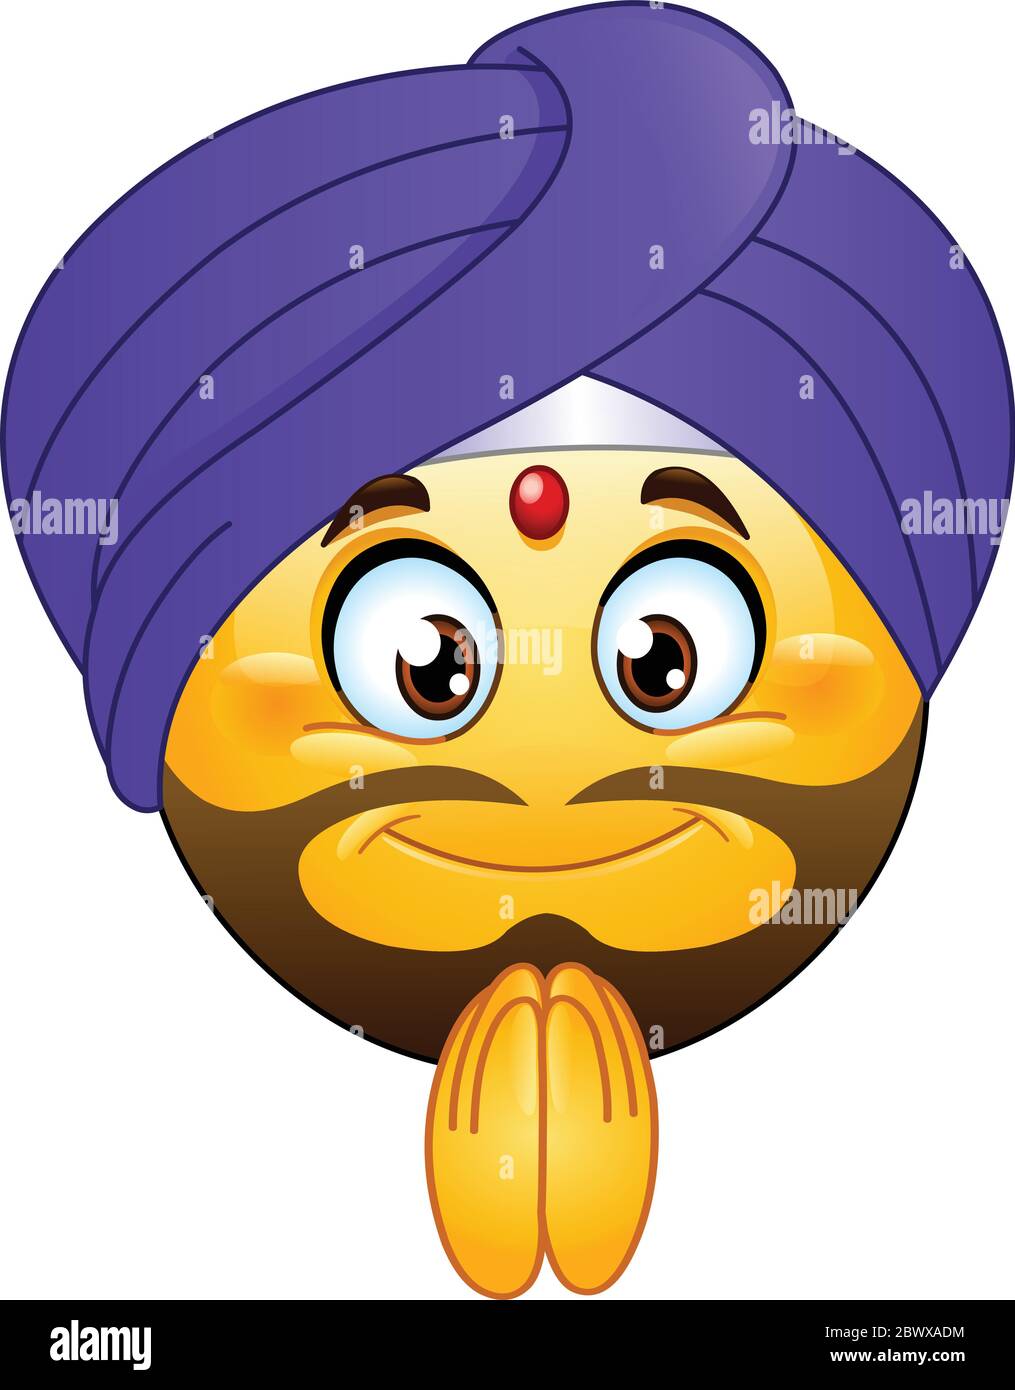 Traditional bearded Indian male emoji emoticon with a red tikka on his forehead wearing a purple turban and making a Namaste gesture Stock Vector